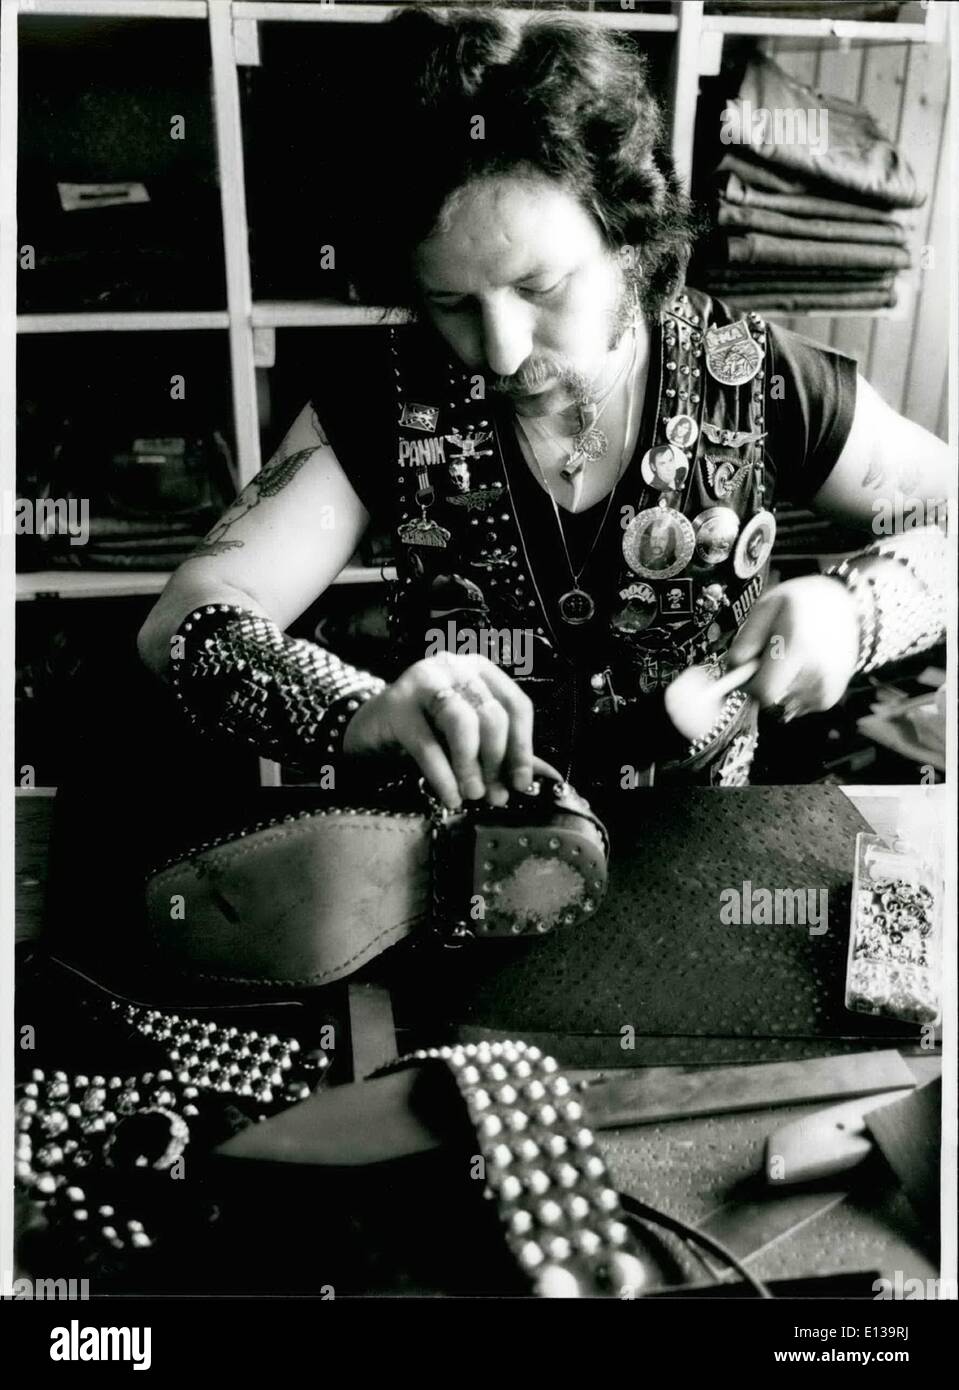 Feb. 29, 2012 - It was a hard work for a hard man : To finish his leather-jacket. James Schroder, 29 needed more than 8000 rivets and glittering stones for his work. When he started hammering the rivets for the jacket it was a hobby for James, but now his hobby became his profession: in a shop on Hamburg's world famous reeperbahn James hammers for other people who love rivets and leather (our picture). They have to pay for one rivet one mark, for a glittering stone 1.20 mark. He is riveting everything, even bras Stock Photo